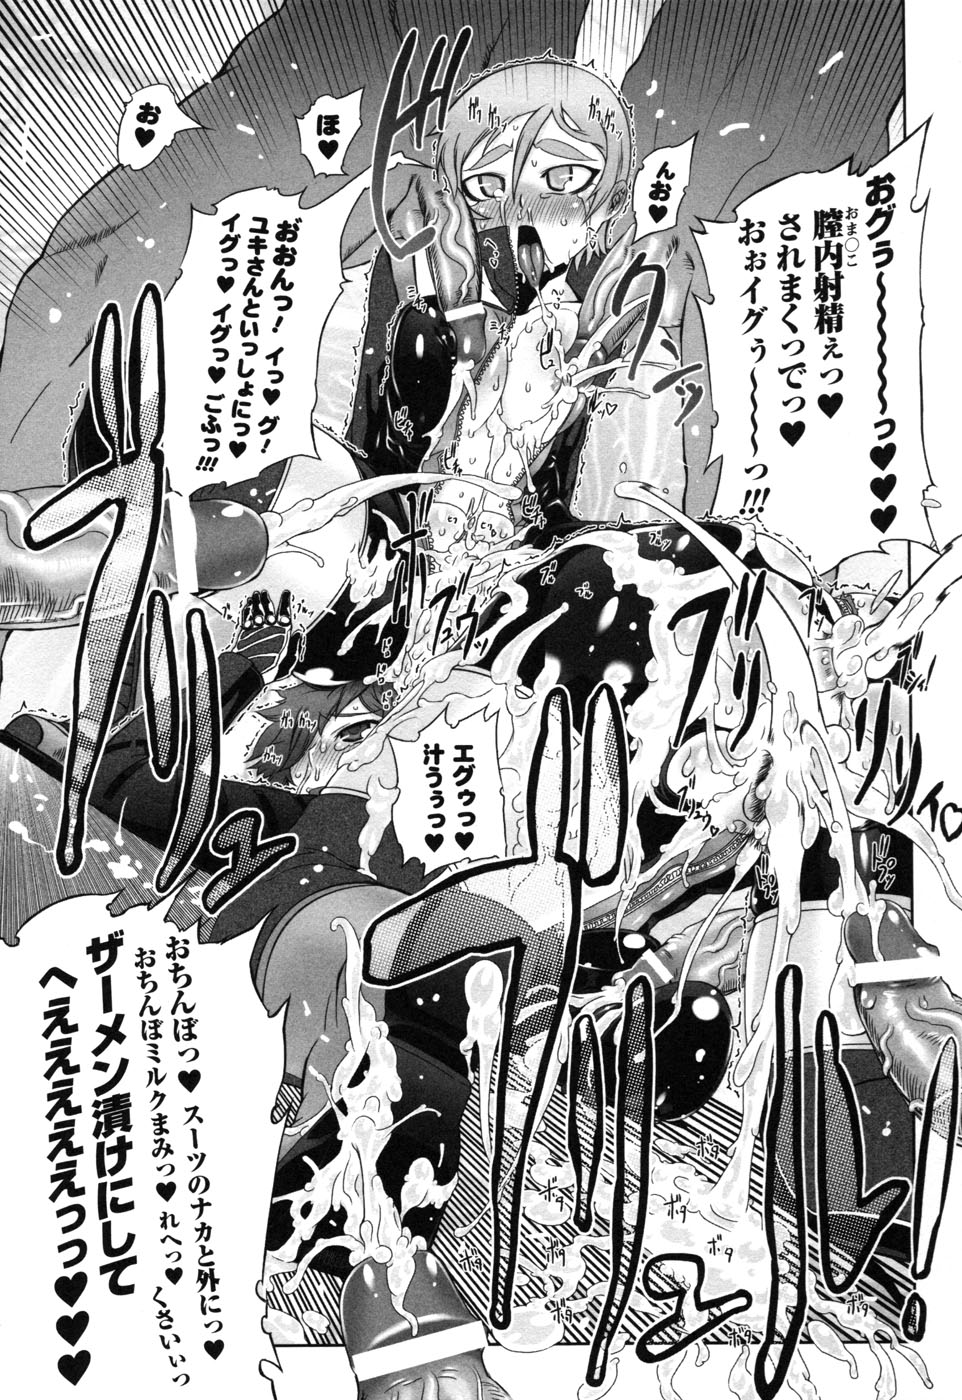 Rider Suit Heroine Anthology Comics 2 page 45 full